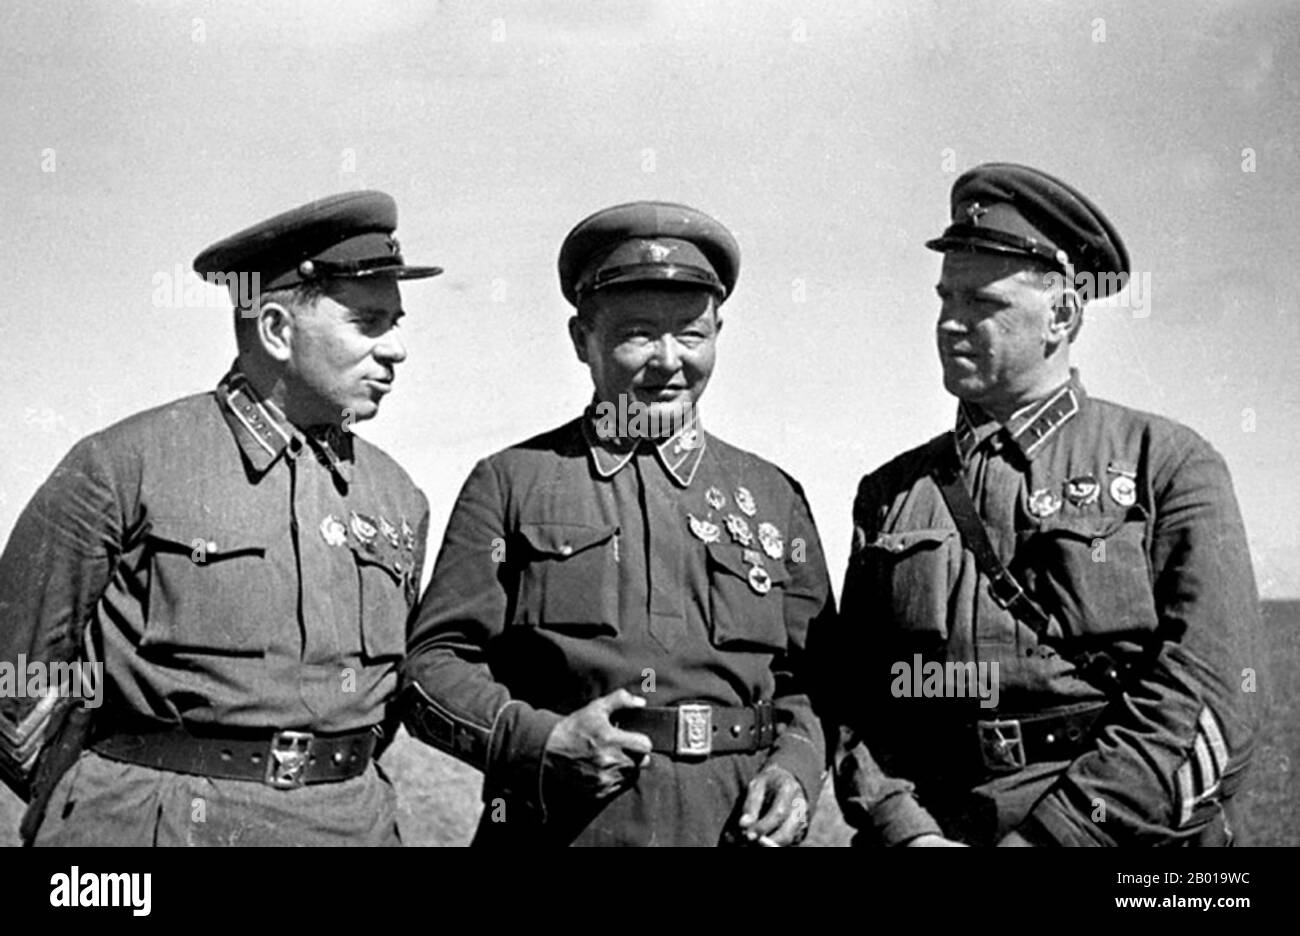 Mongolia: Colonel Grigori Shtern (left) Marshal Khorloogiin Choibalsan (centre), General Georgy Zhukov (right), victors of Khalkhin Gol. Photo by Pavel Troshkin (1909-1944), 1939.  The Battles of Khalkhin Gol were the decisive engagements of the undeclared Soviet-Japanese Border War fought between the Soviet Union, Mongolia and Japan in 1939. They were named after the river Khalkhin Gol, which passes through the battlefield. In Japan, the decisive battle of the conflict is known as the Nomonhan Incident (Nomonhan Jiken) after a nearby village, and was a total defeat for their army. Stock Photo